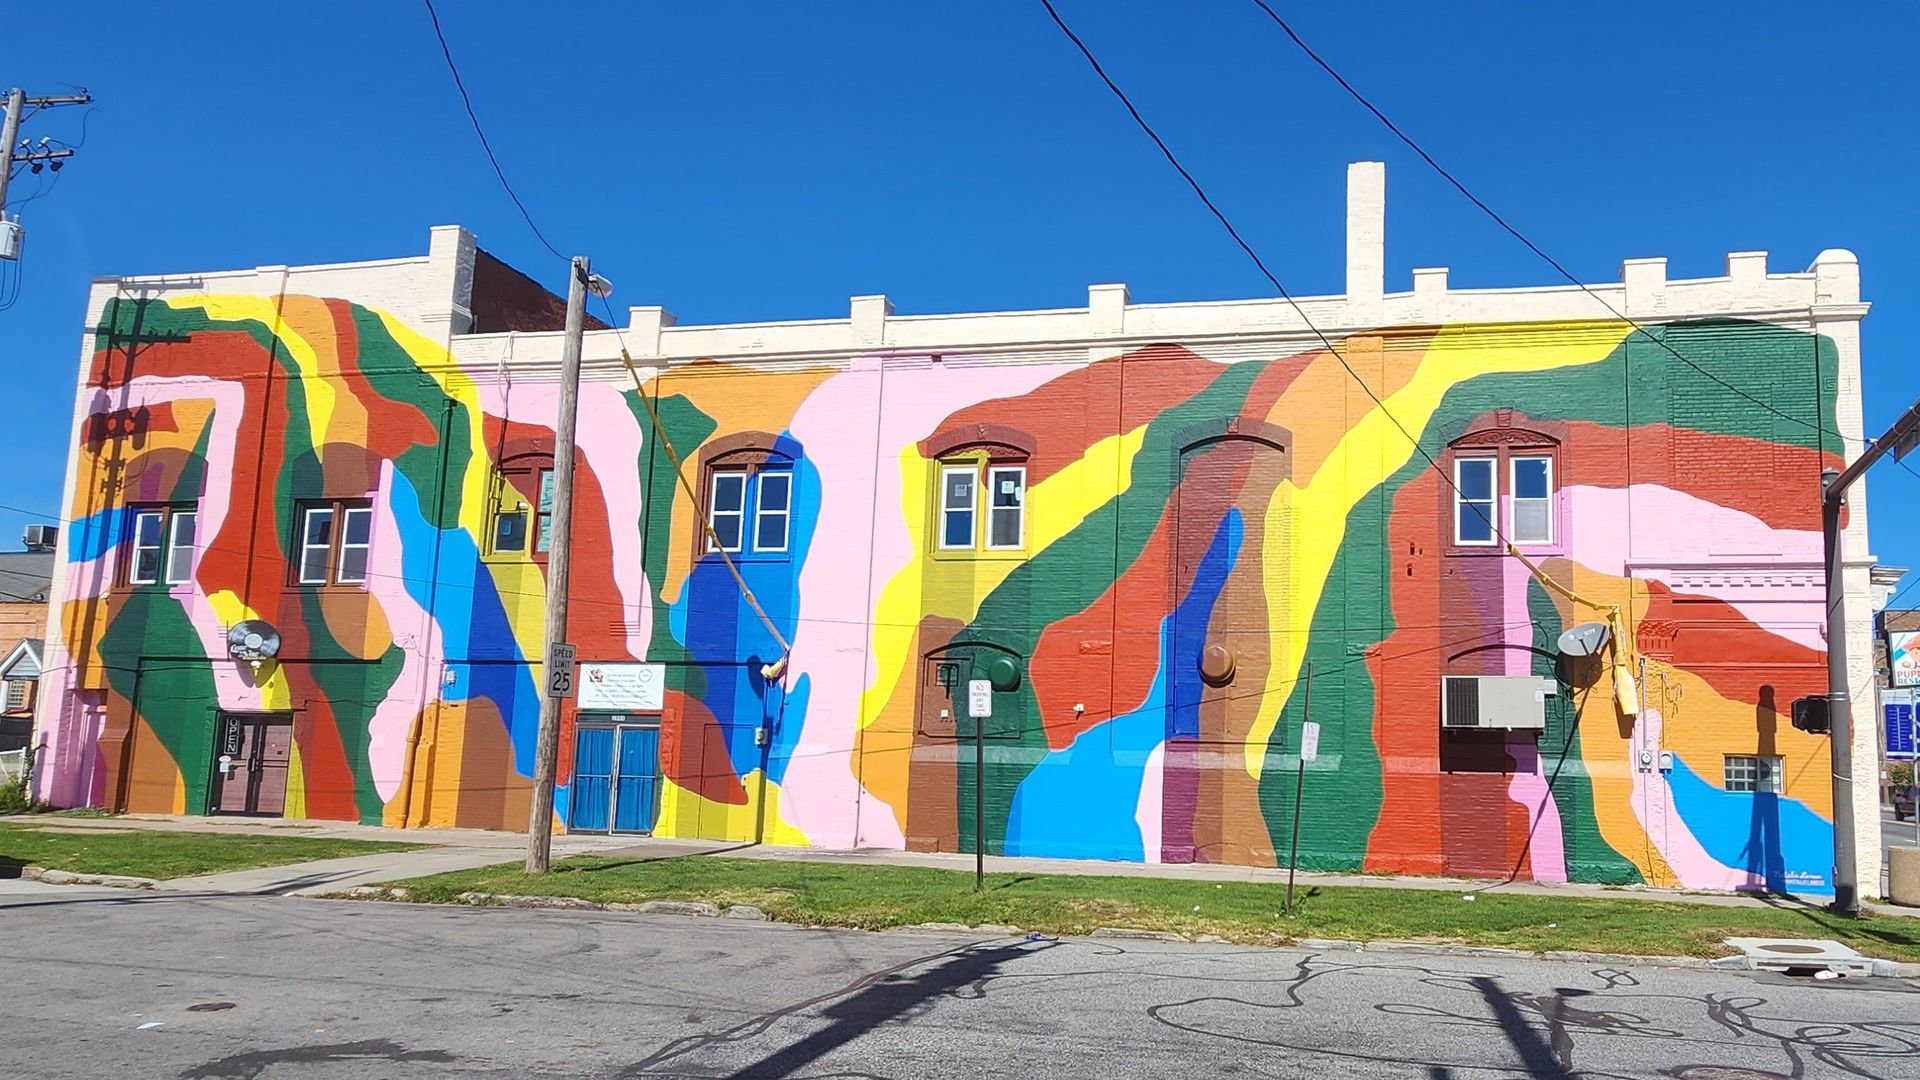 Abstract mural in Cleveland, with bright colors on a  two story building